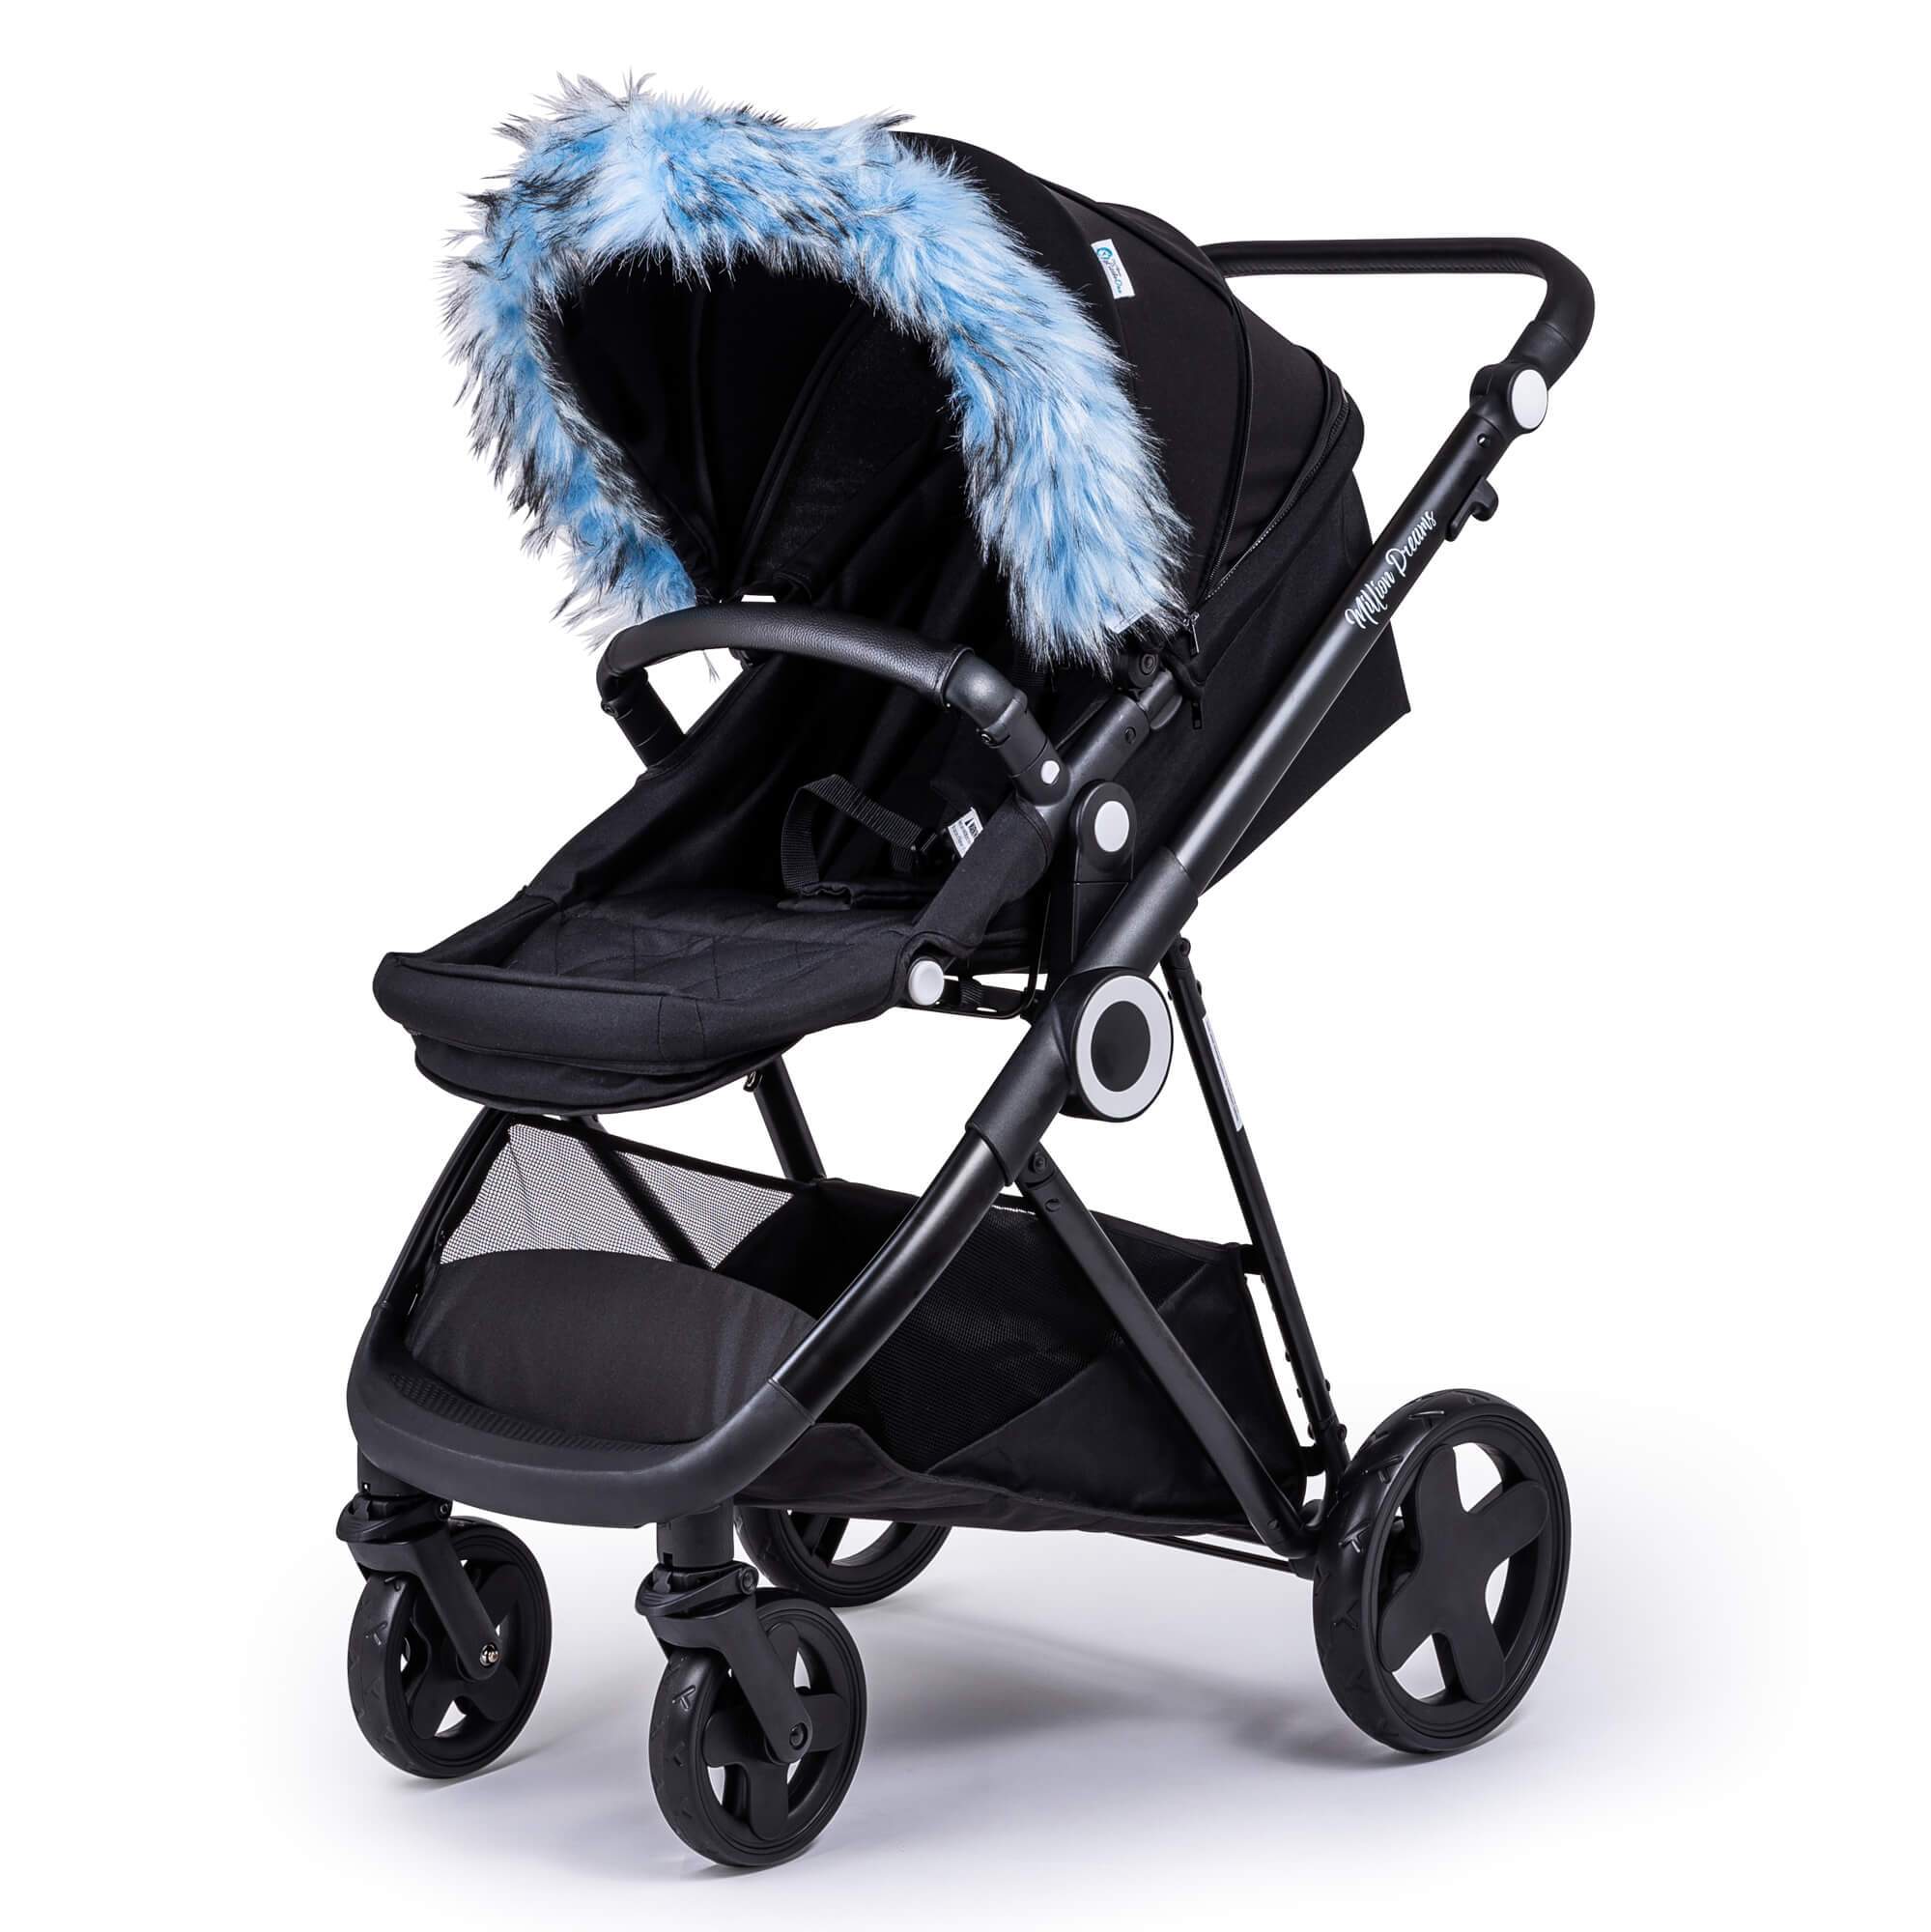 Pram Fur Hood Trim Attachment for Pushchair Compatible with Babybus - Light Blue / Fits All Models | For Your Little One